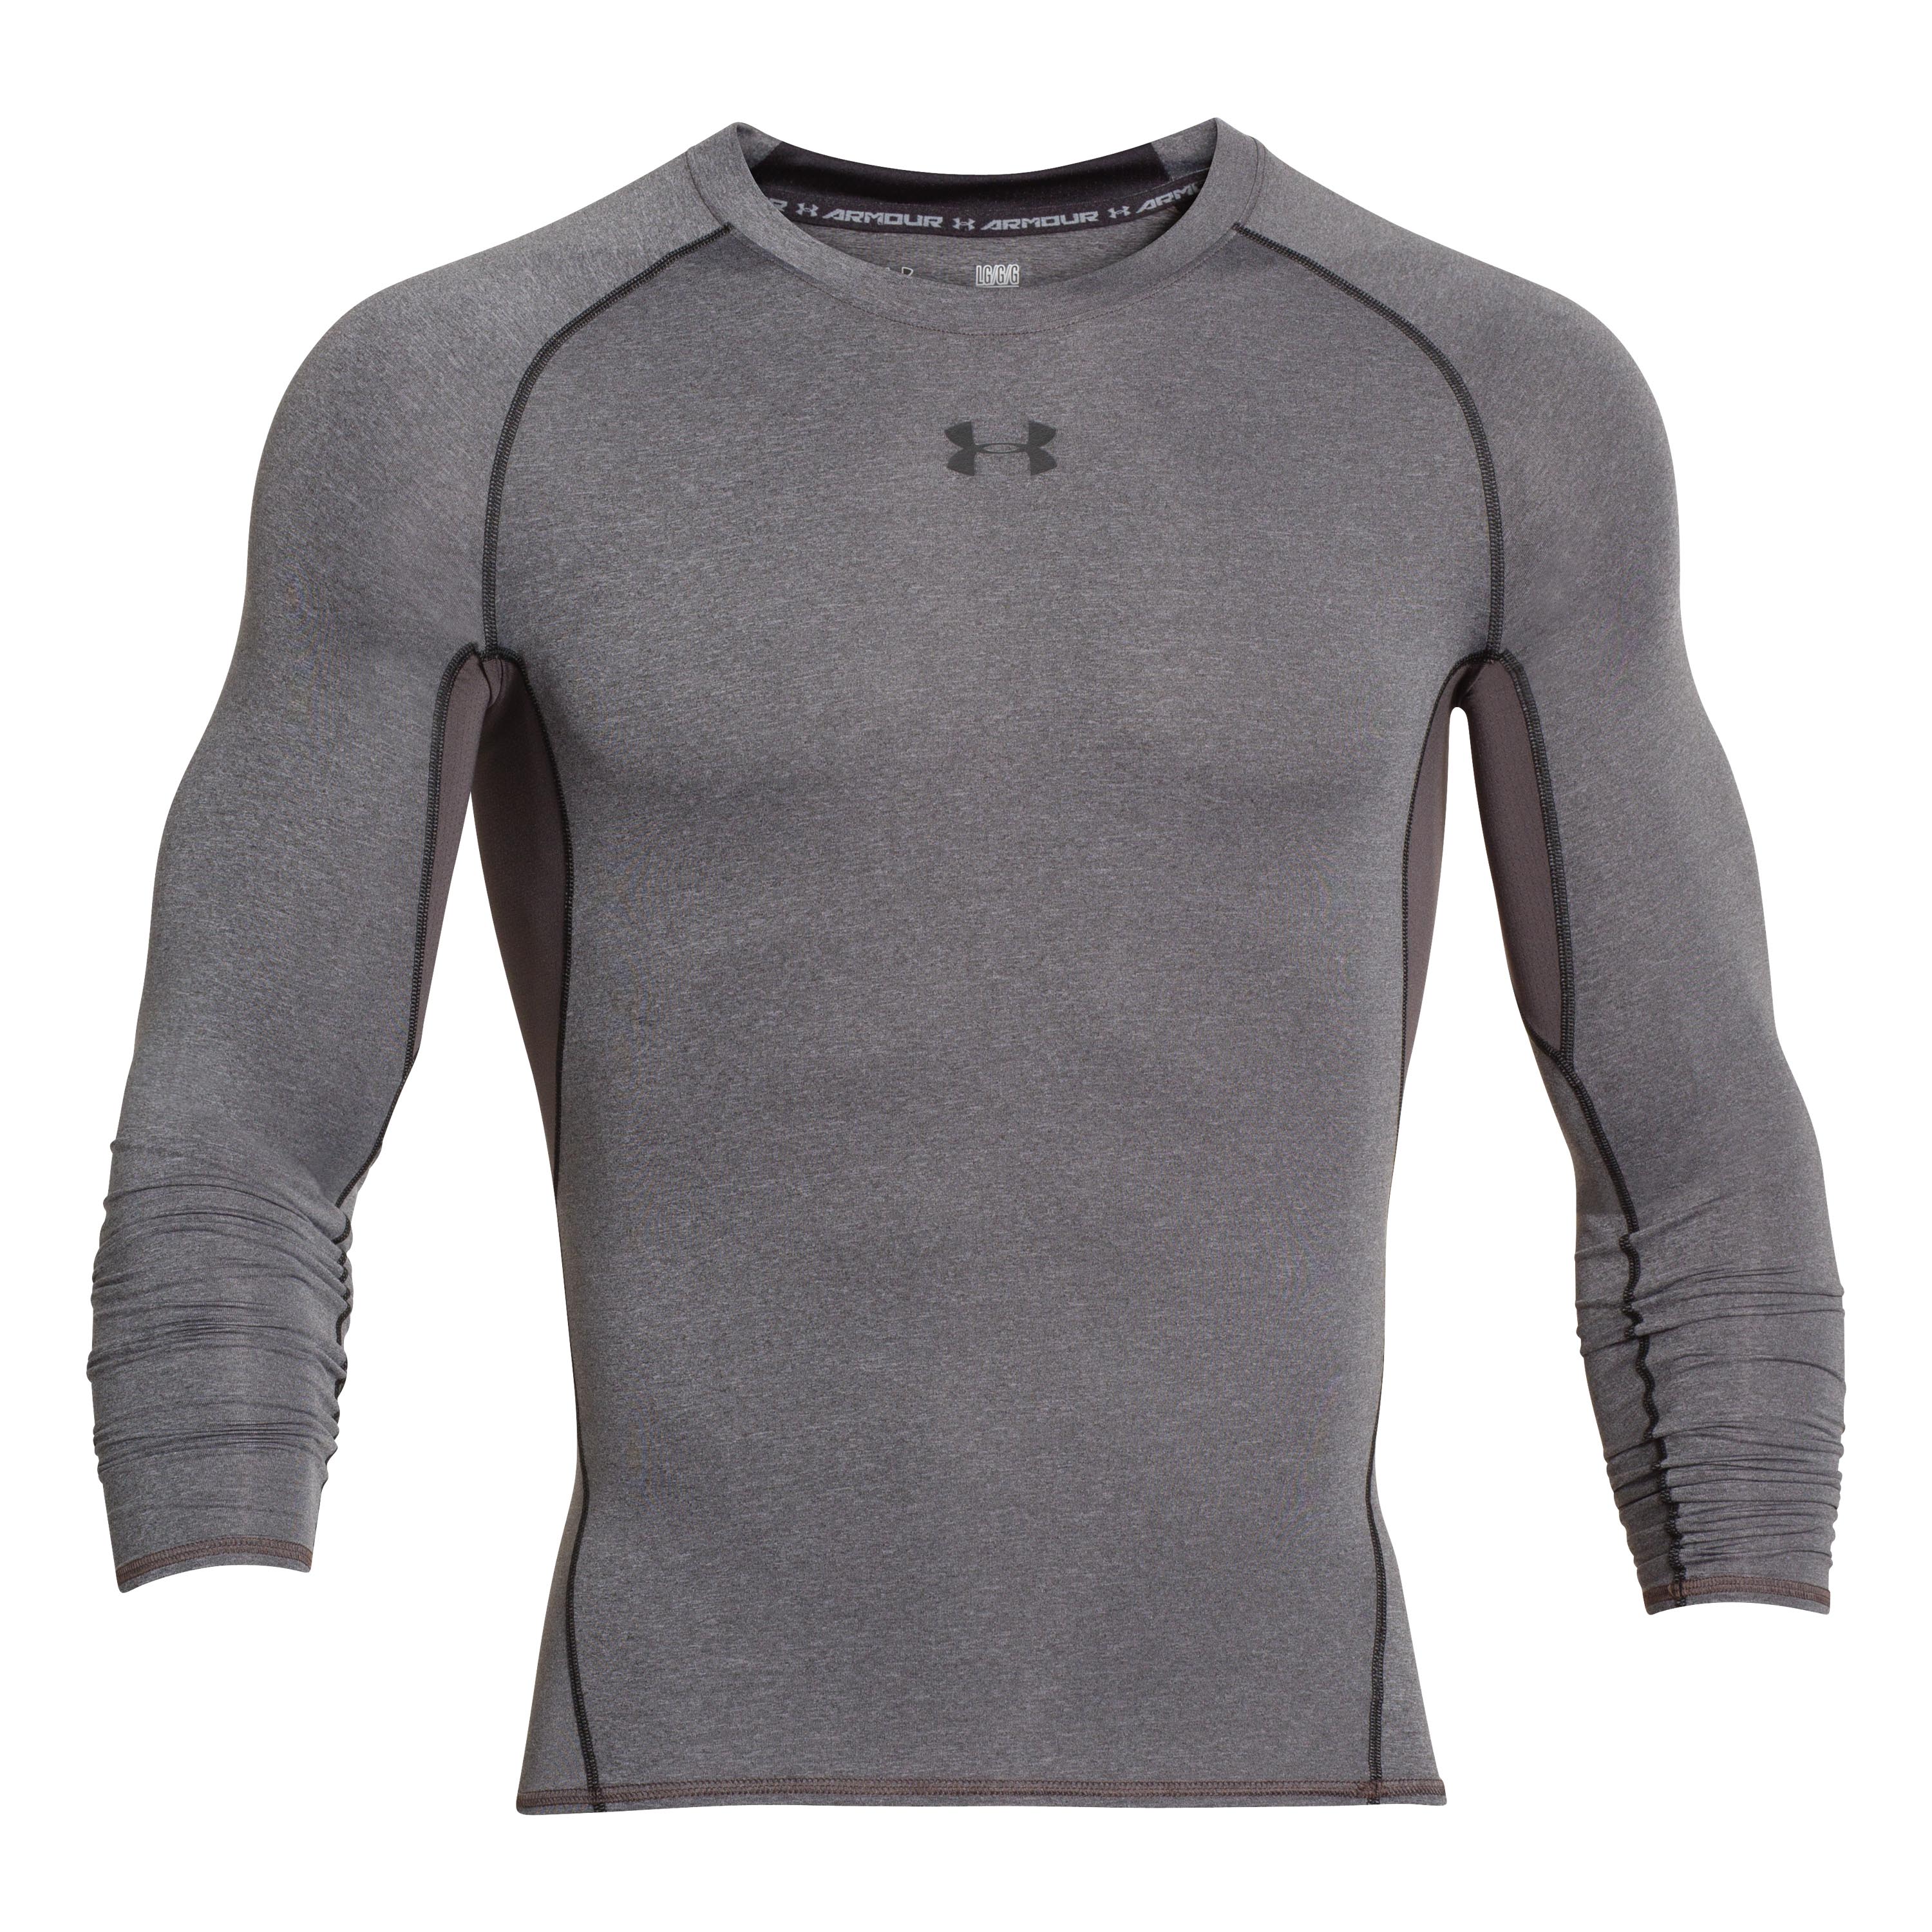 under armour compression fit